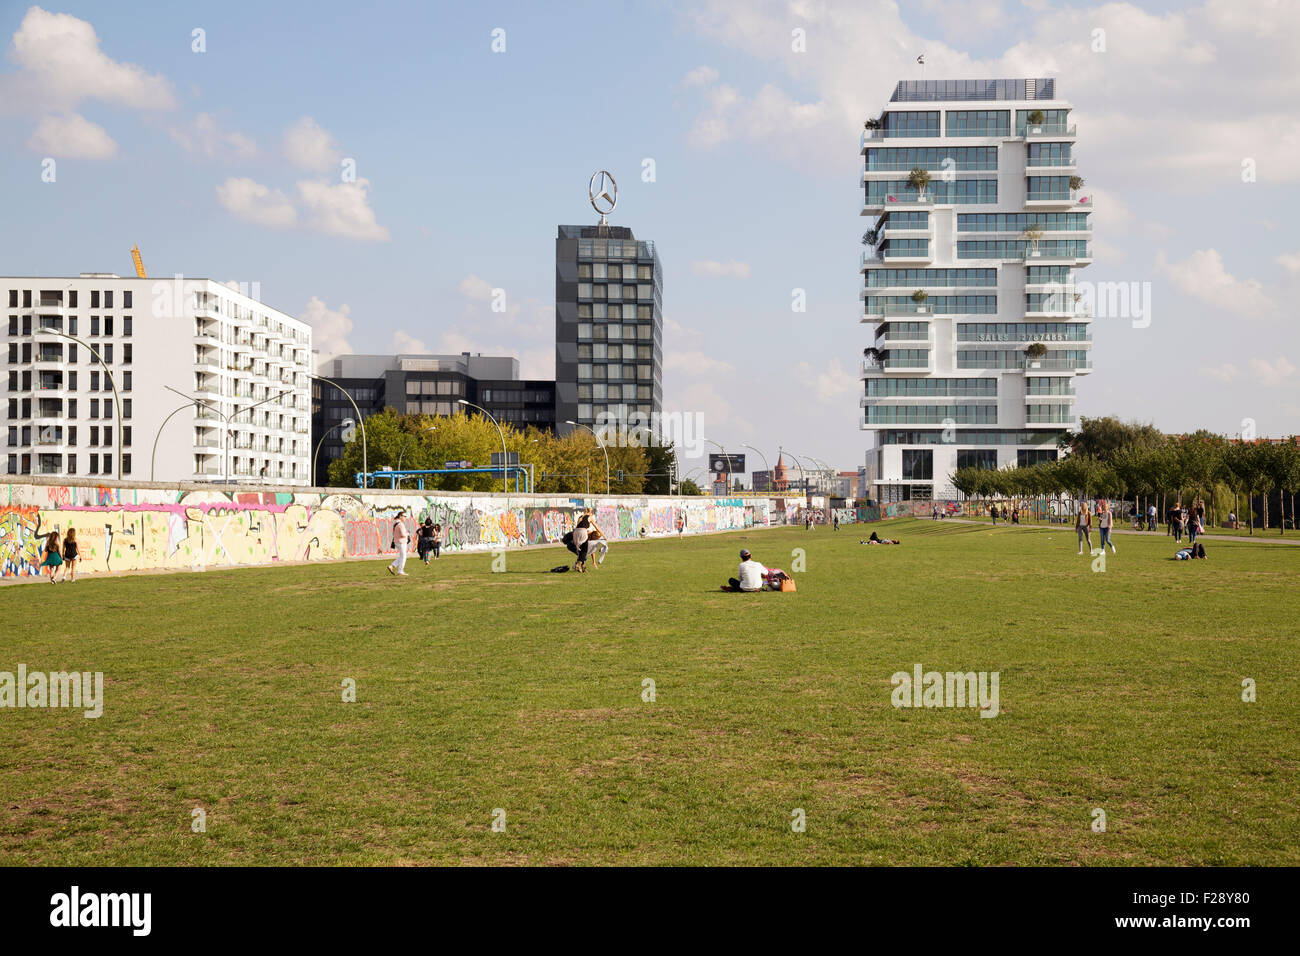 people in the former death strip at the East Side Gallery with a new luxury apartment block behind, Berlin, Germany Stock Photo